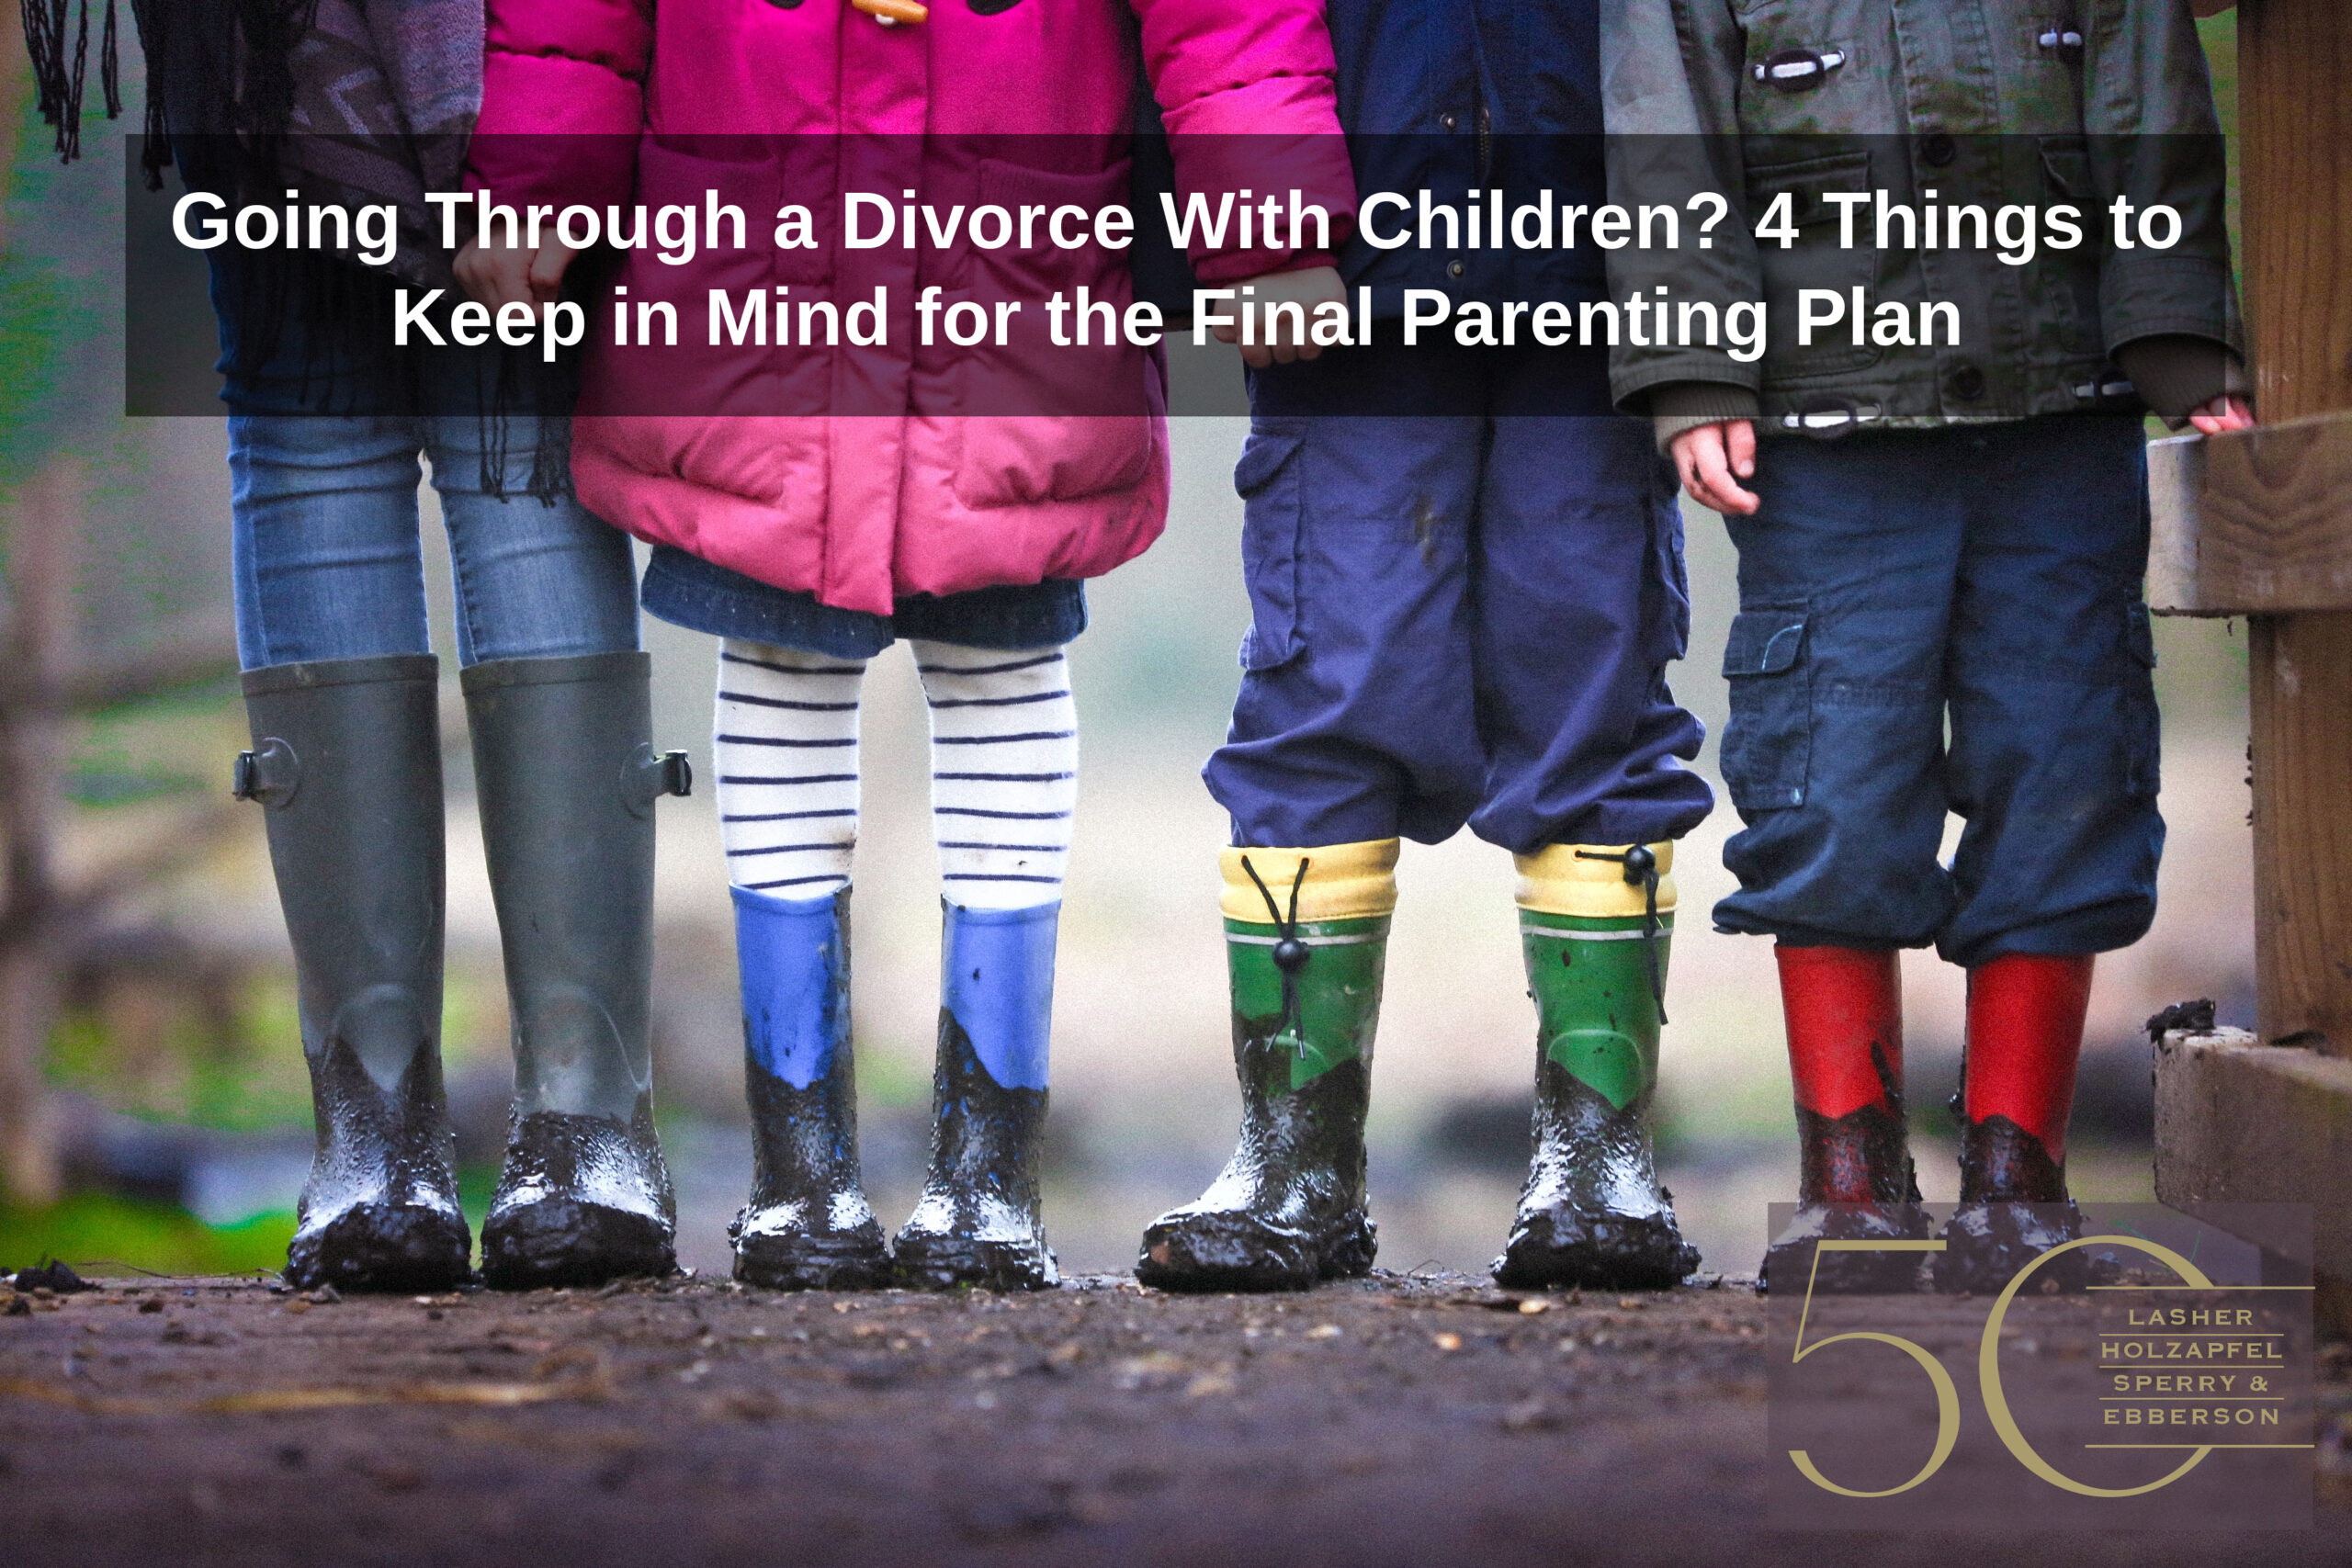 Going Through a Divorce With Children? 4 Things to Keep in Mind for the Final Parenting Plan